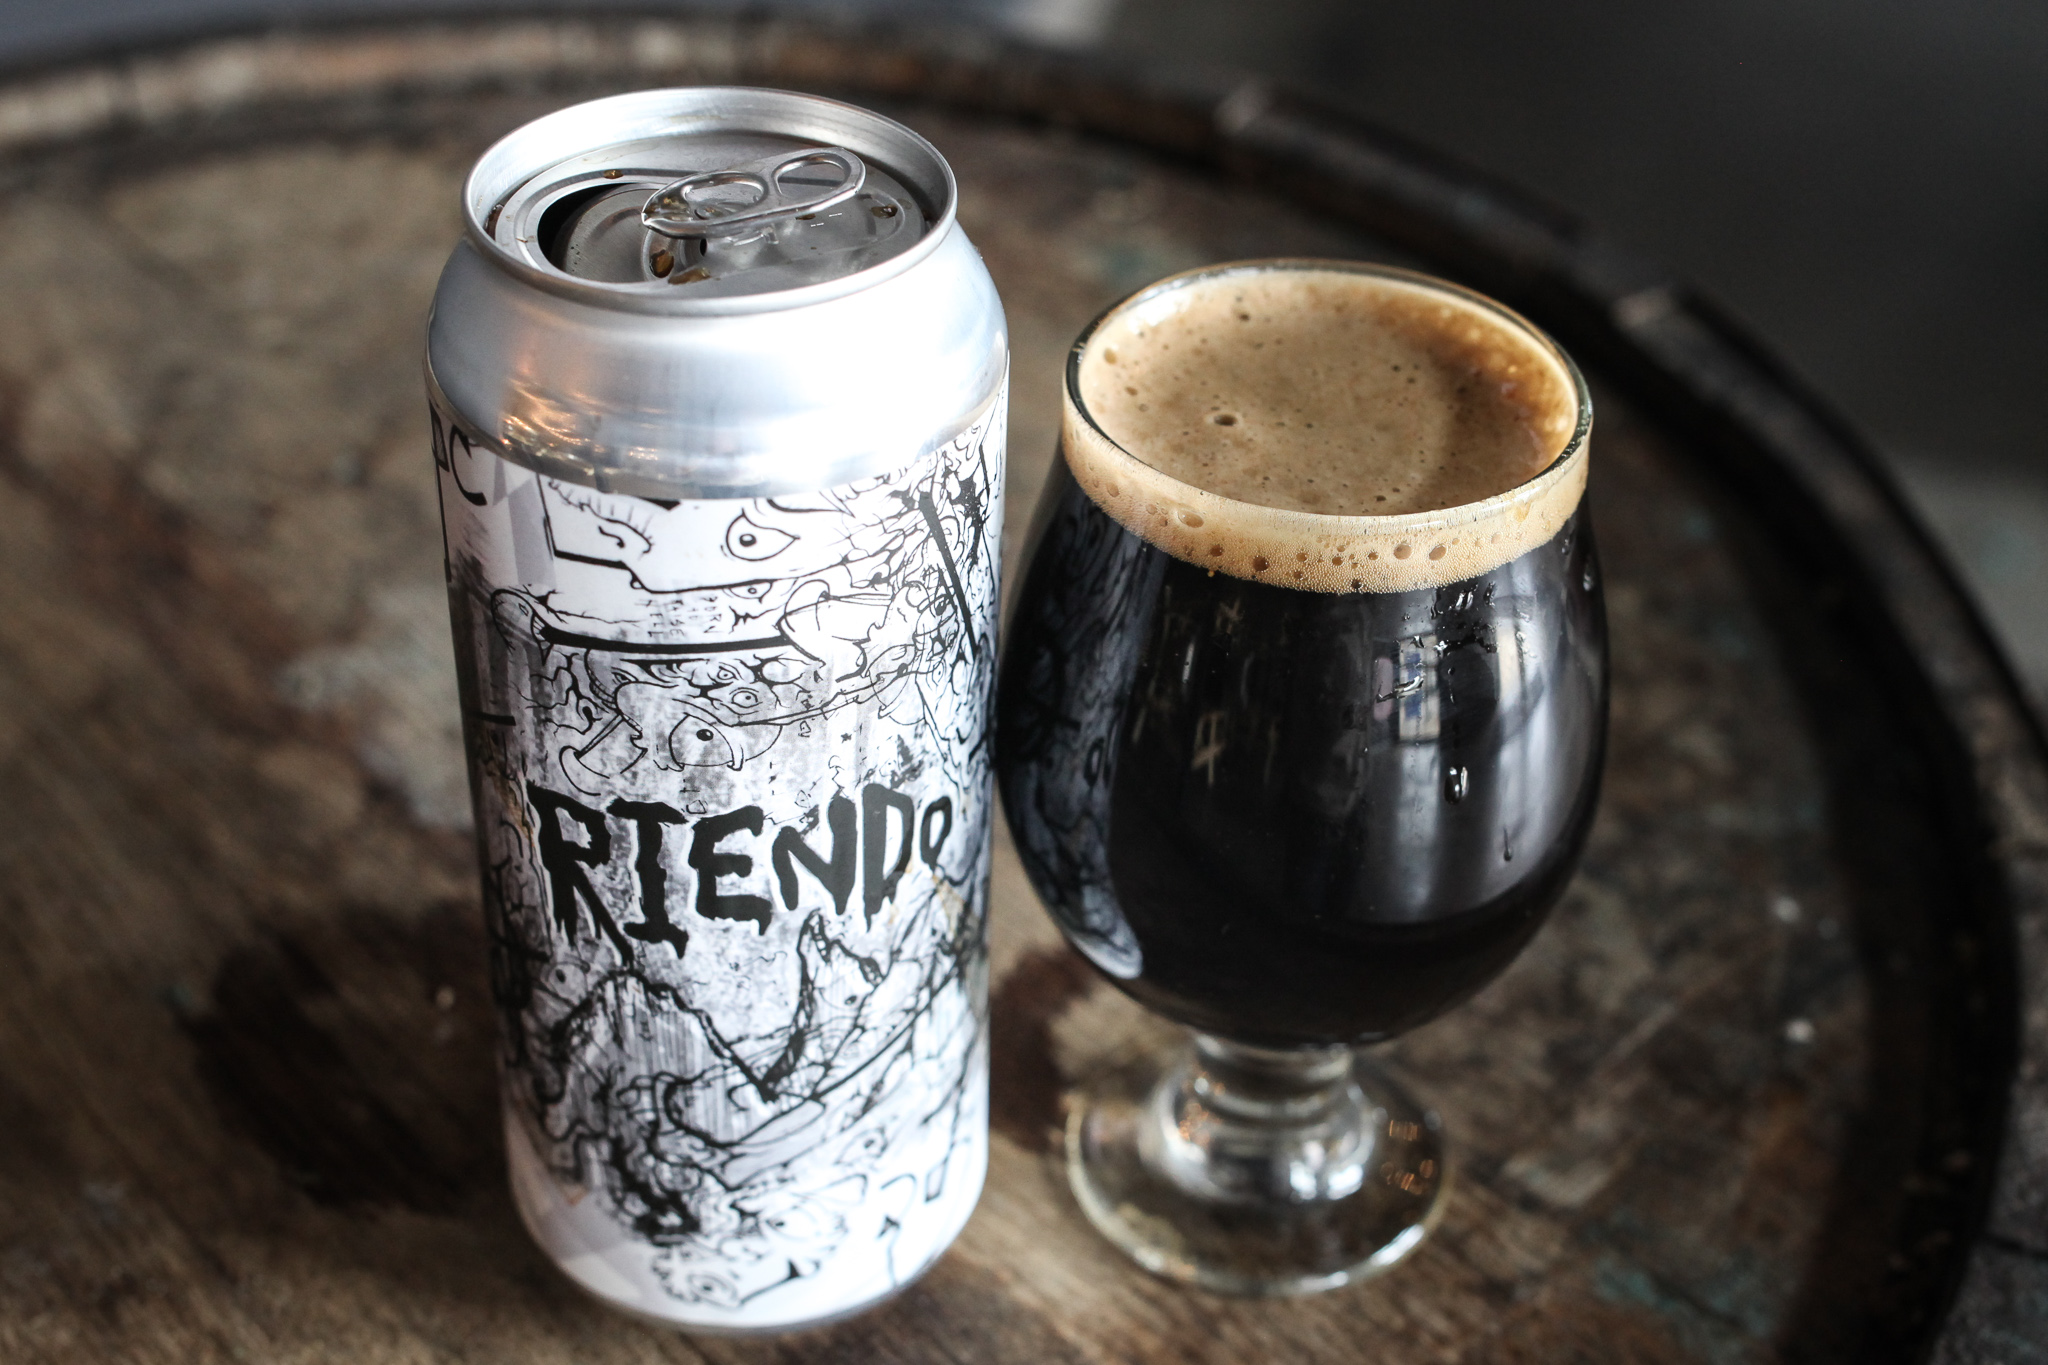 A 16oz can of beer with a black and white label reading "Riendo" next to a tulip shaped glass of a dark imperial stout